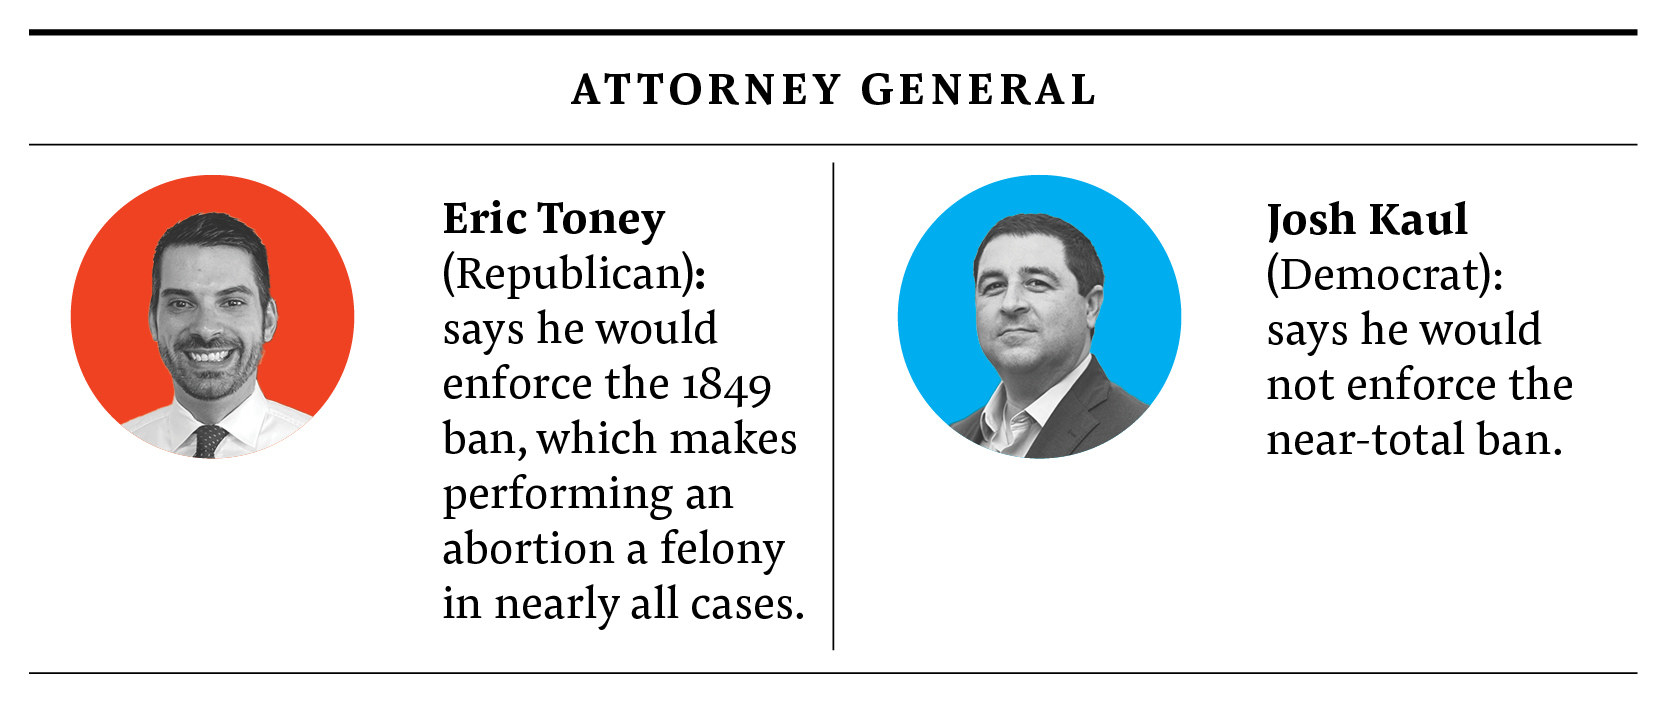 Infographic: Toney (republican): says he would enforce the 1849 ban, ruling abortion a felony in nearly all cases. Kaul (democrat): says he would not enforce the near-total ban